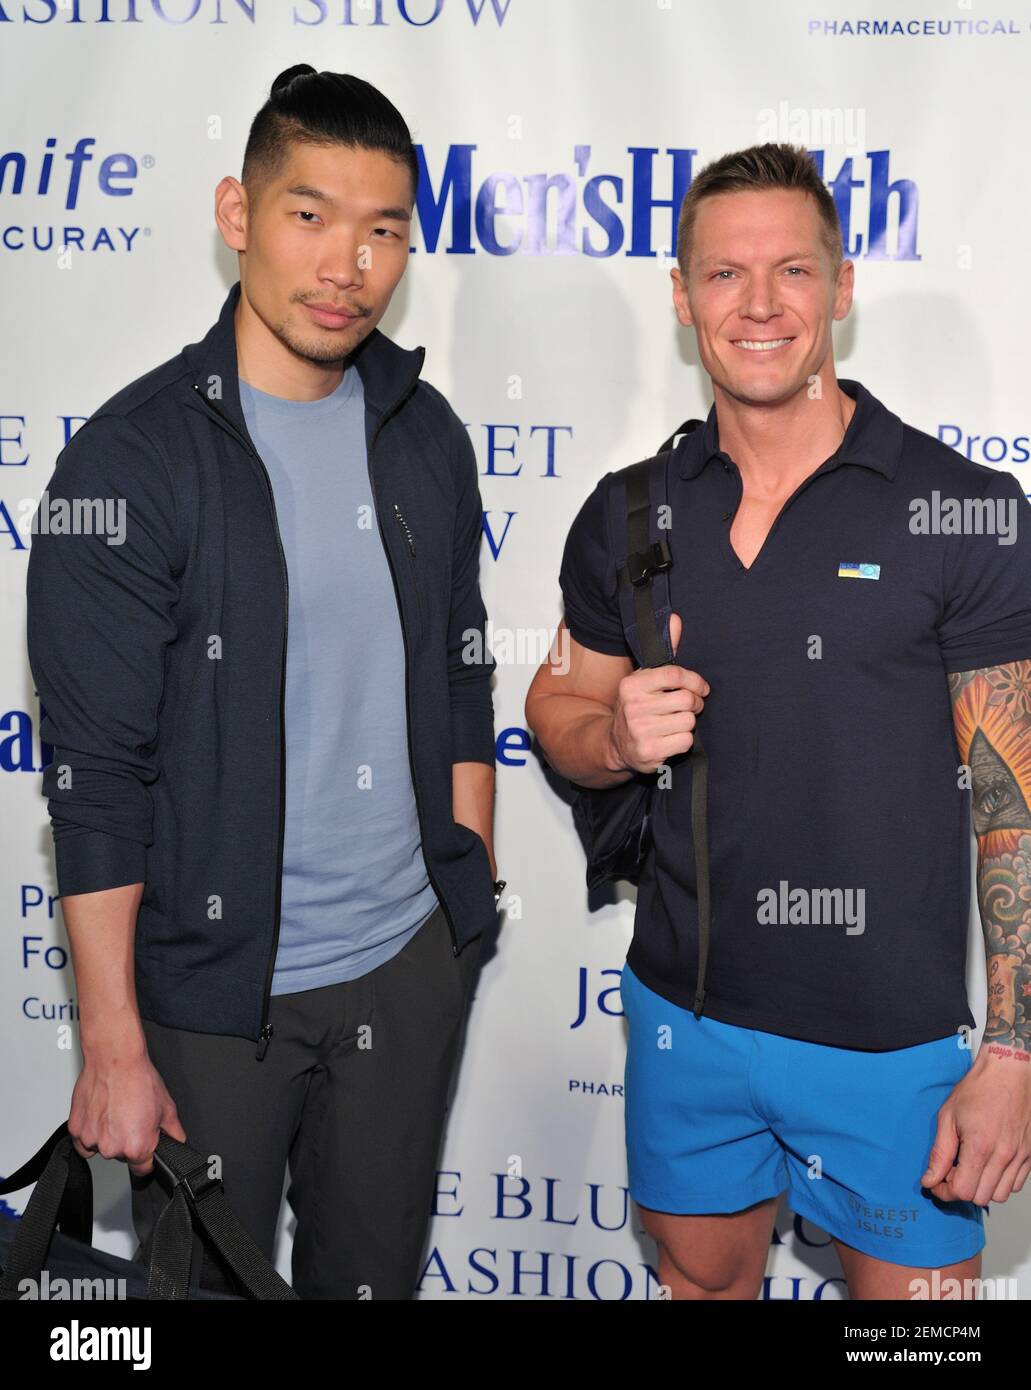 L-R: Model Leo Chan and Jacob Thomas attend the Blue Jacket Fashion Show during NYFW 2019 at Pier 59 Studios in New York, NY on February 7, 2019. (Photo by Stephen Smith/SIPA USA) Stock Photo